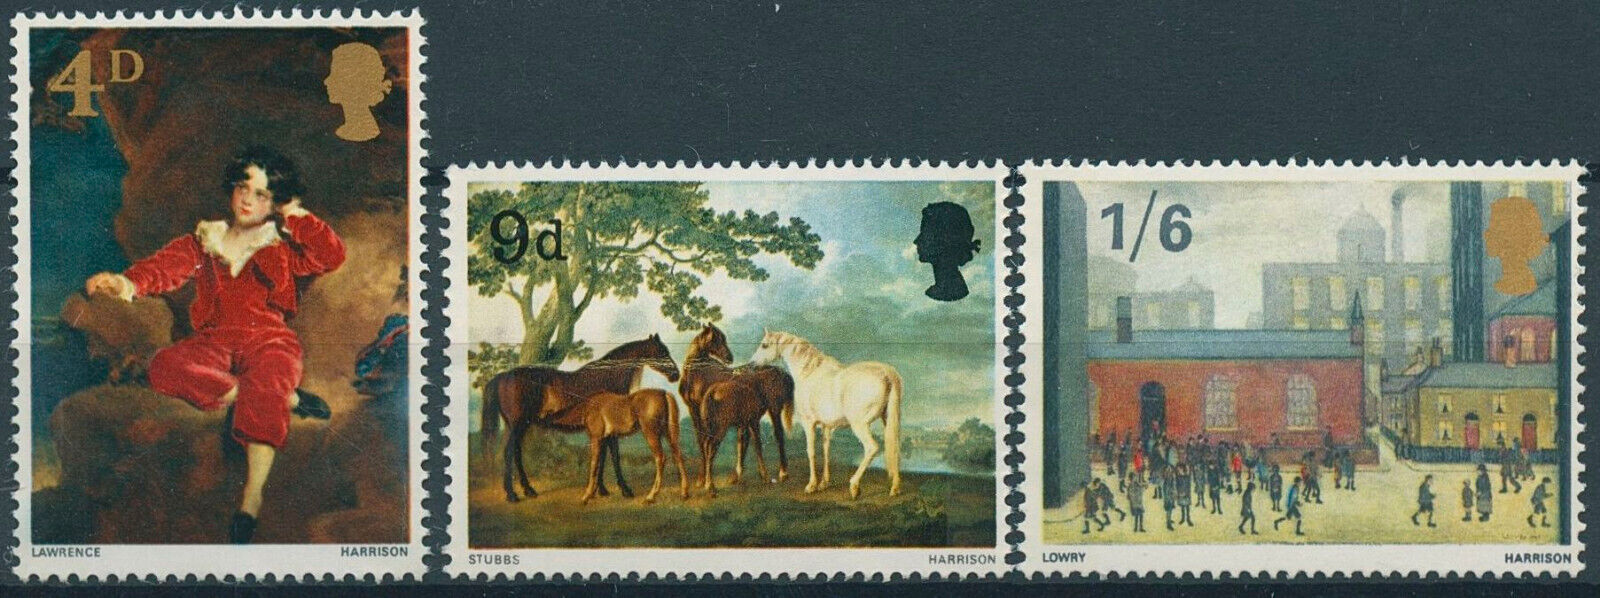 GB 1967 MNH Art Stamps British Paintings Stubbs Horses Lawrence Lowry 3v Set